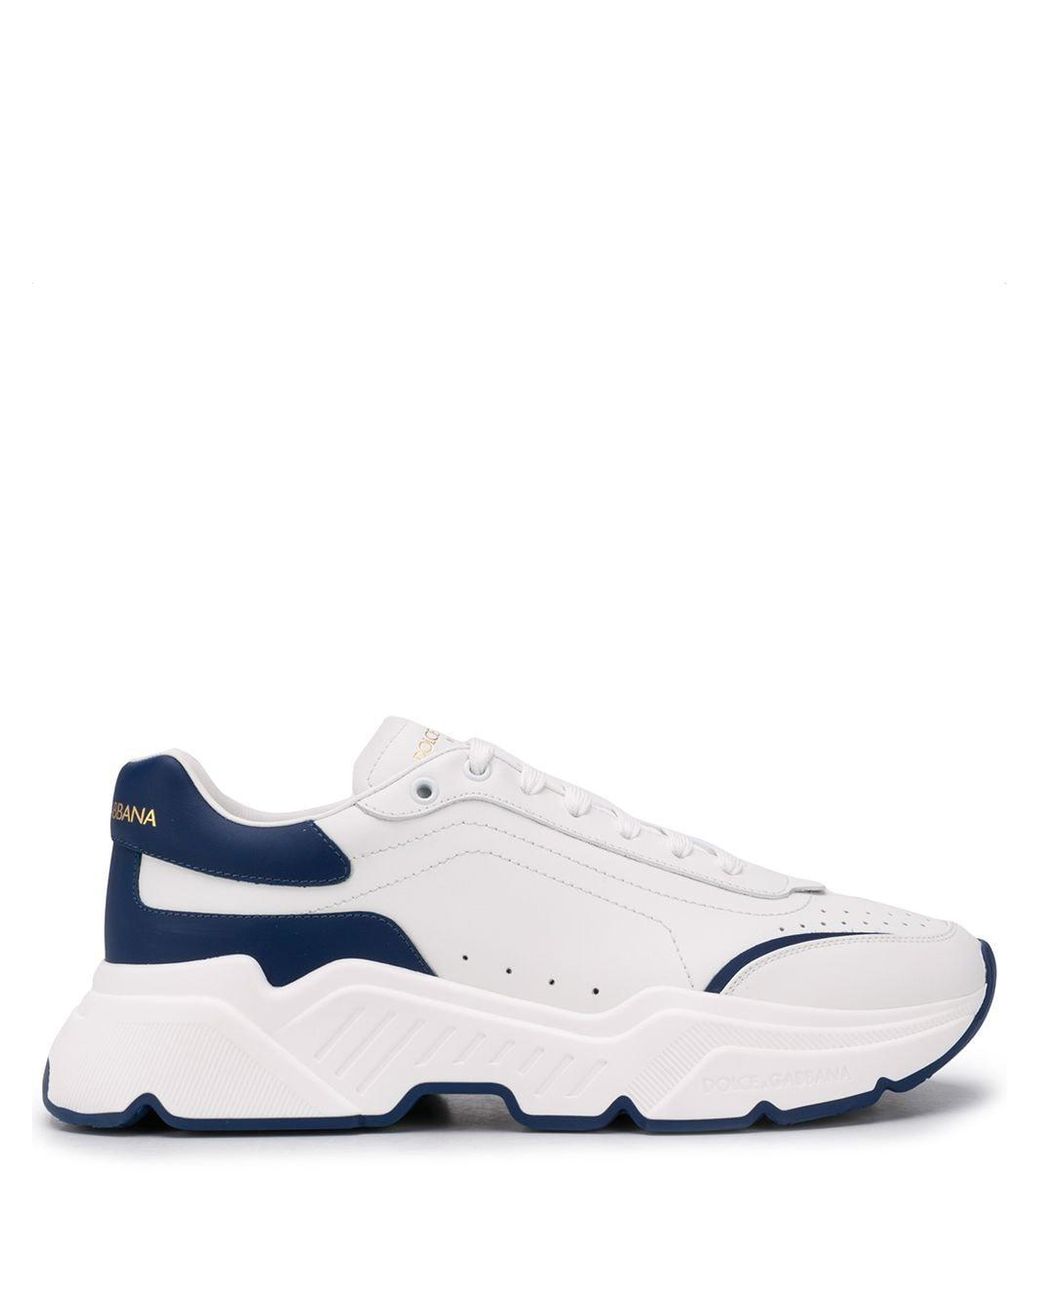 Dolce & Gabbana Leather Daymaster Sneakers in White for Men - Lyst